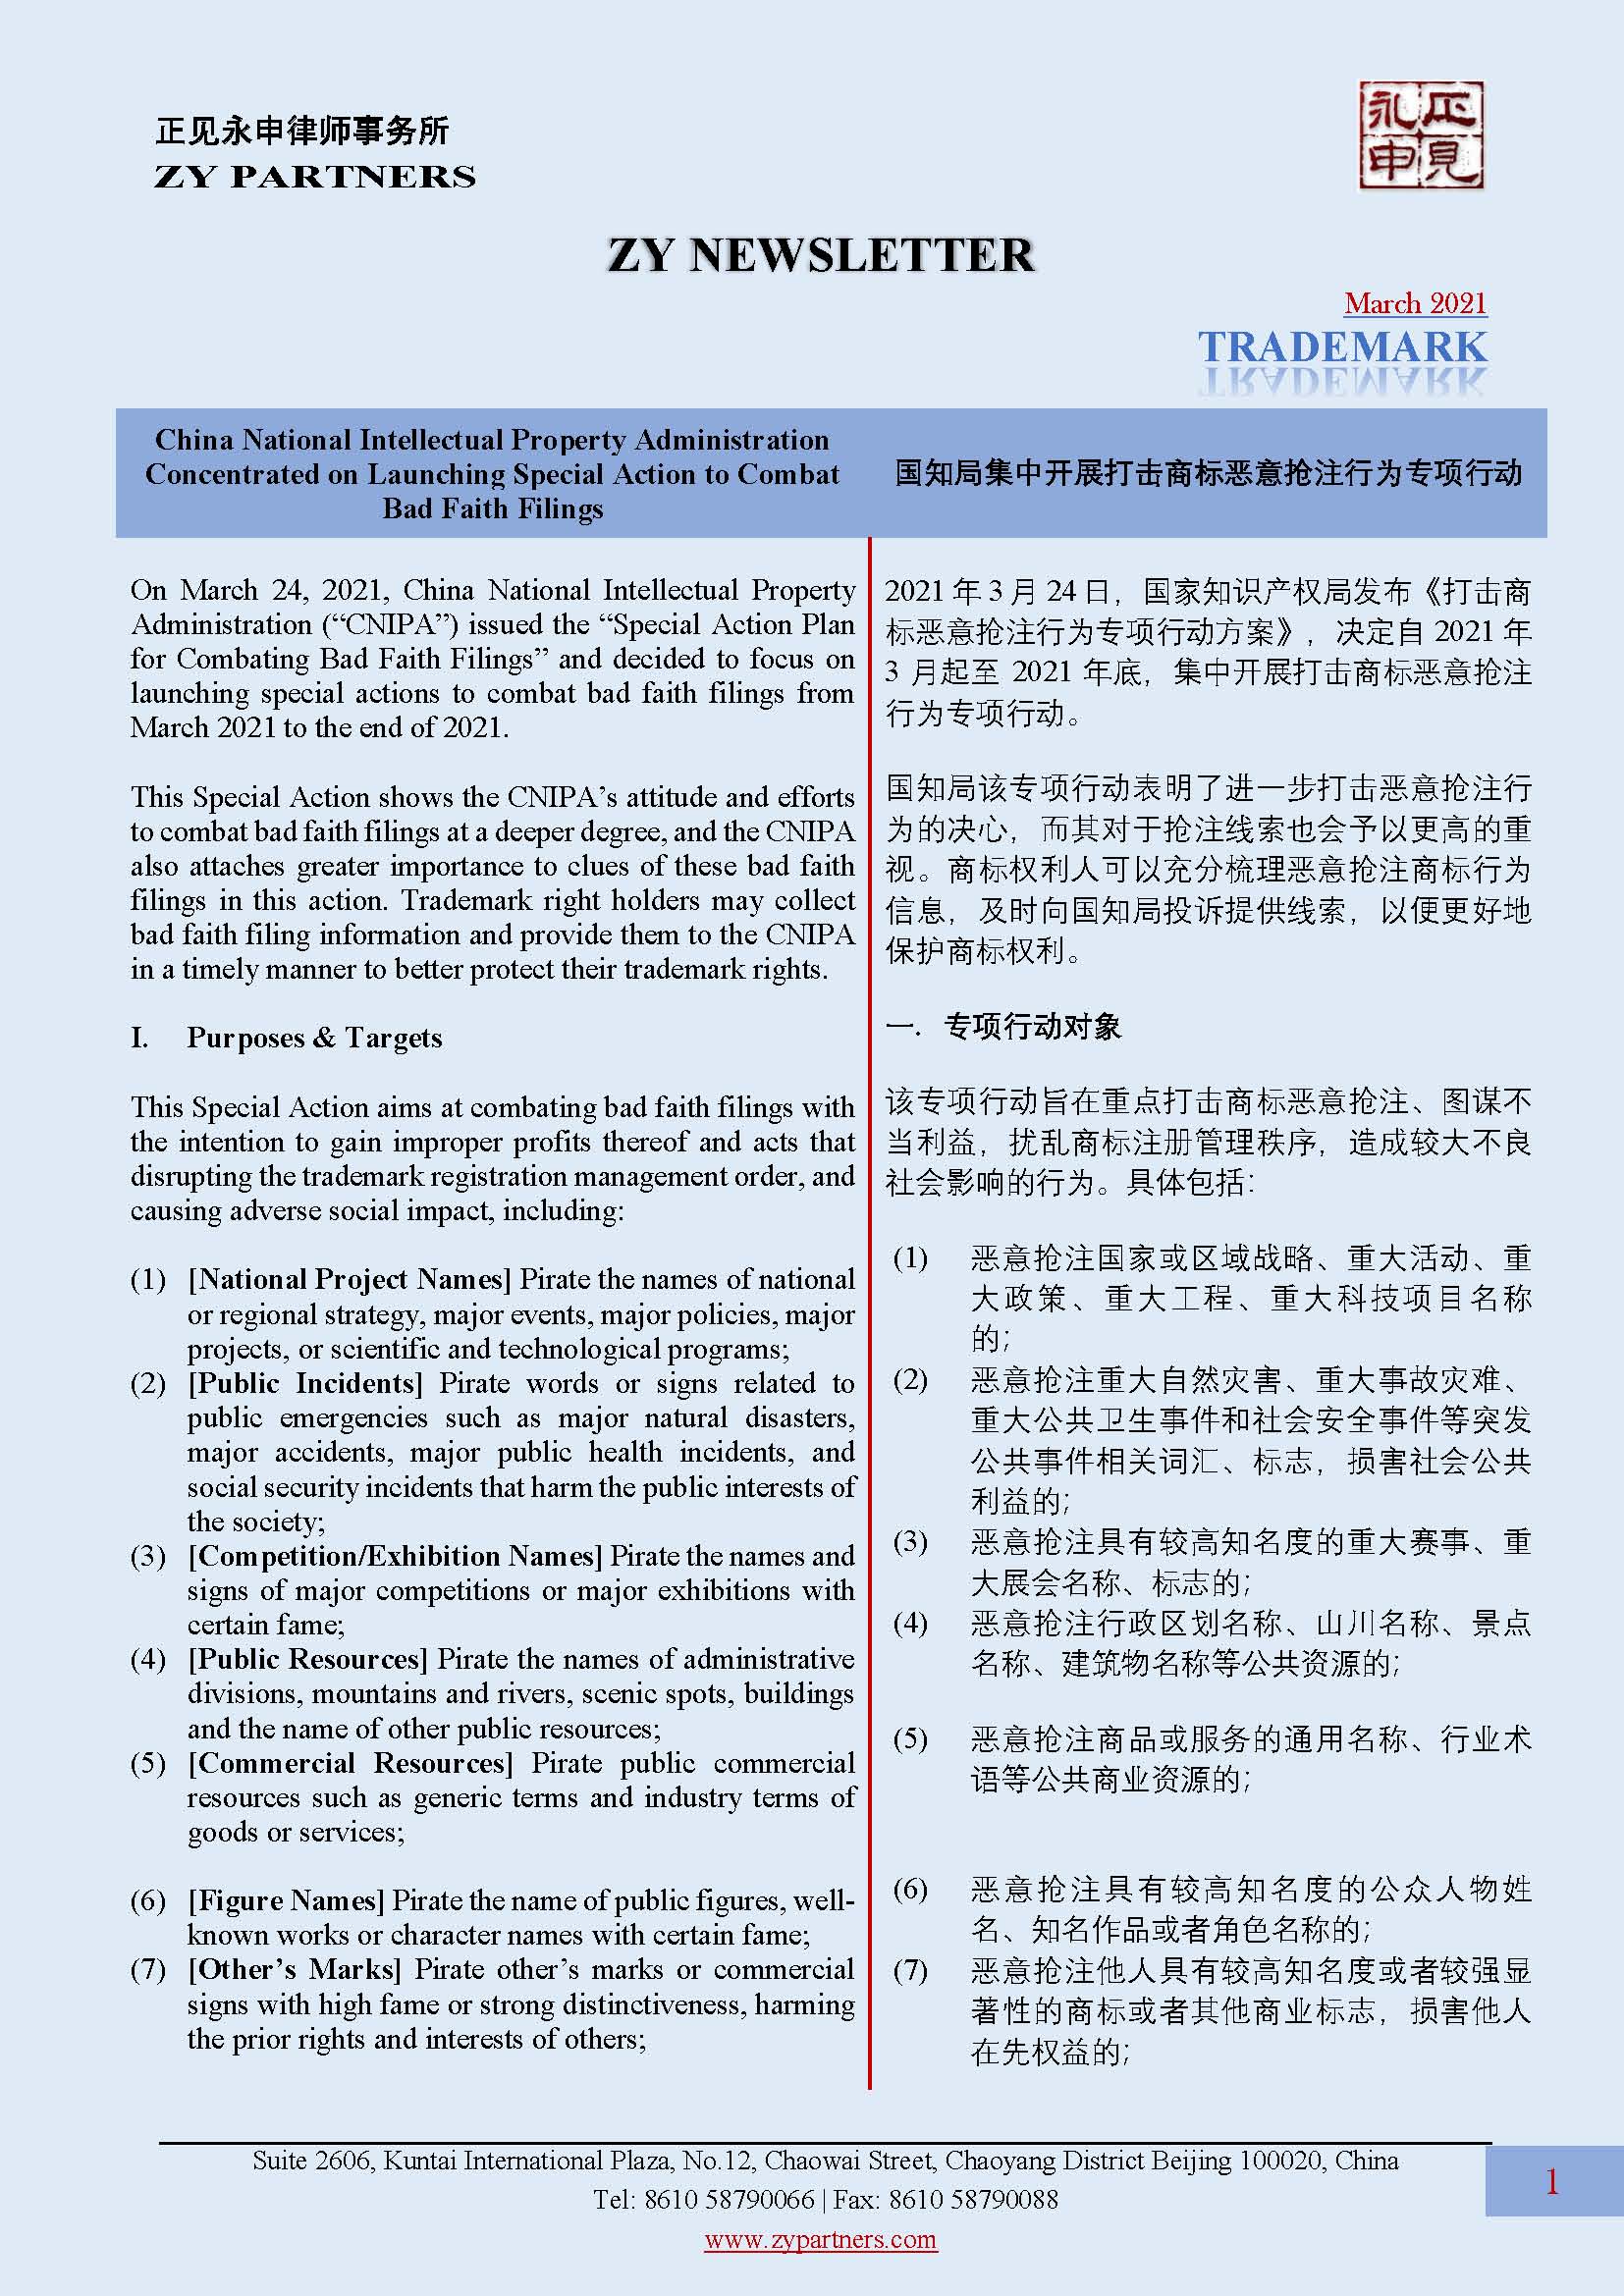 ZY Newsletter on CNIPA Special Action Plan for Combating Bad Faith Filings EN_页面_1.jpg